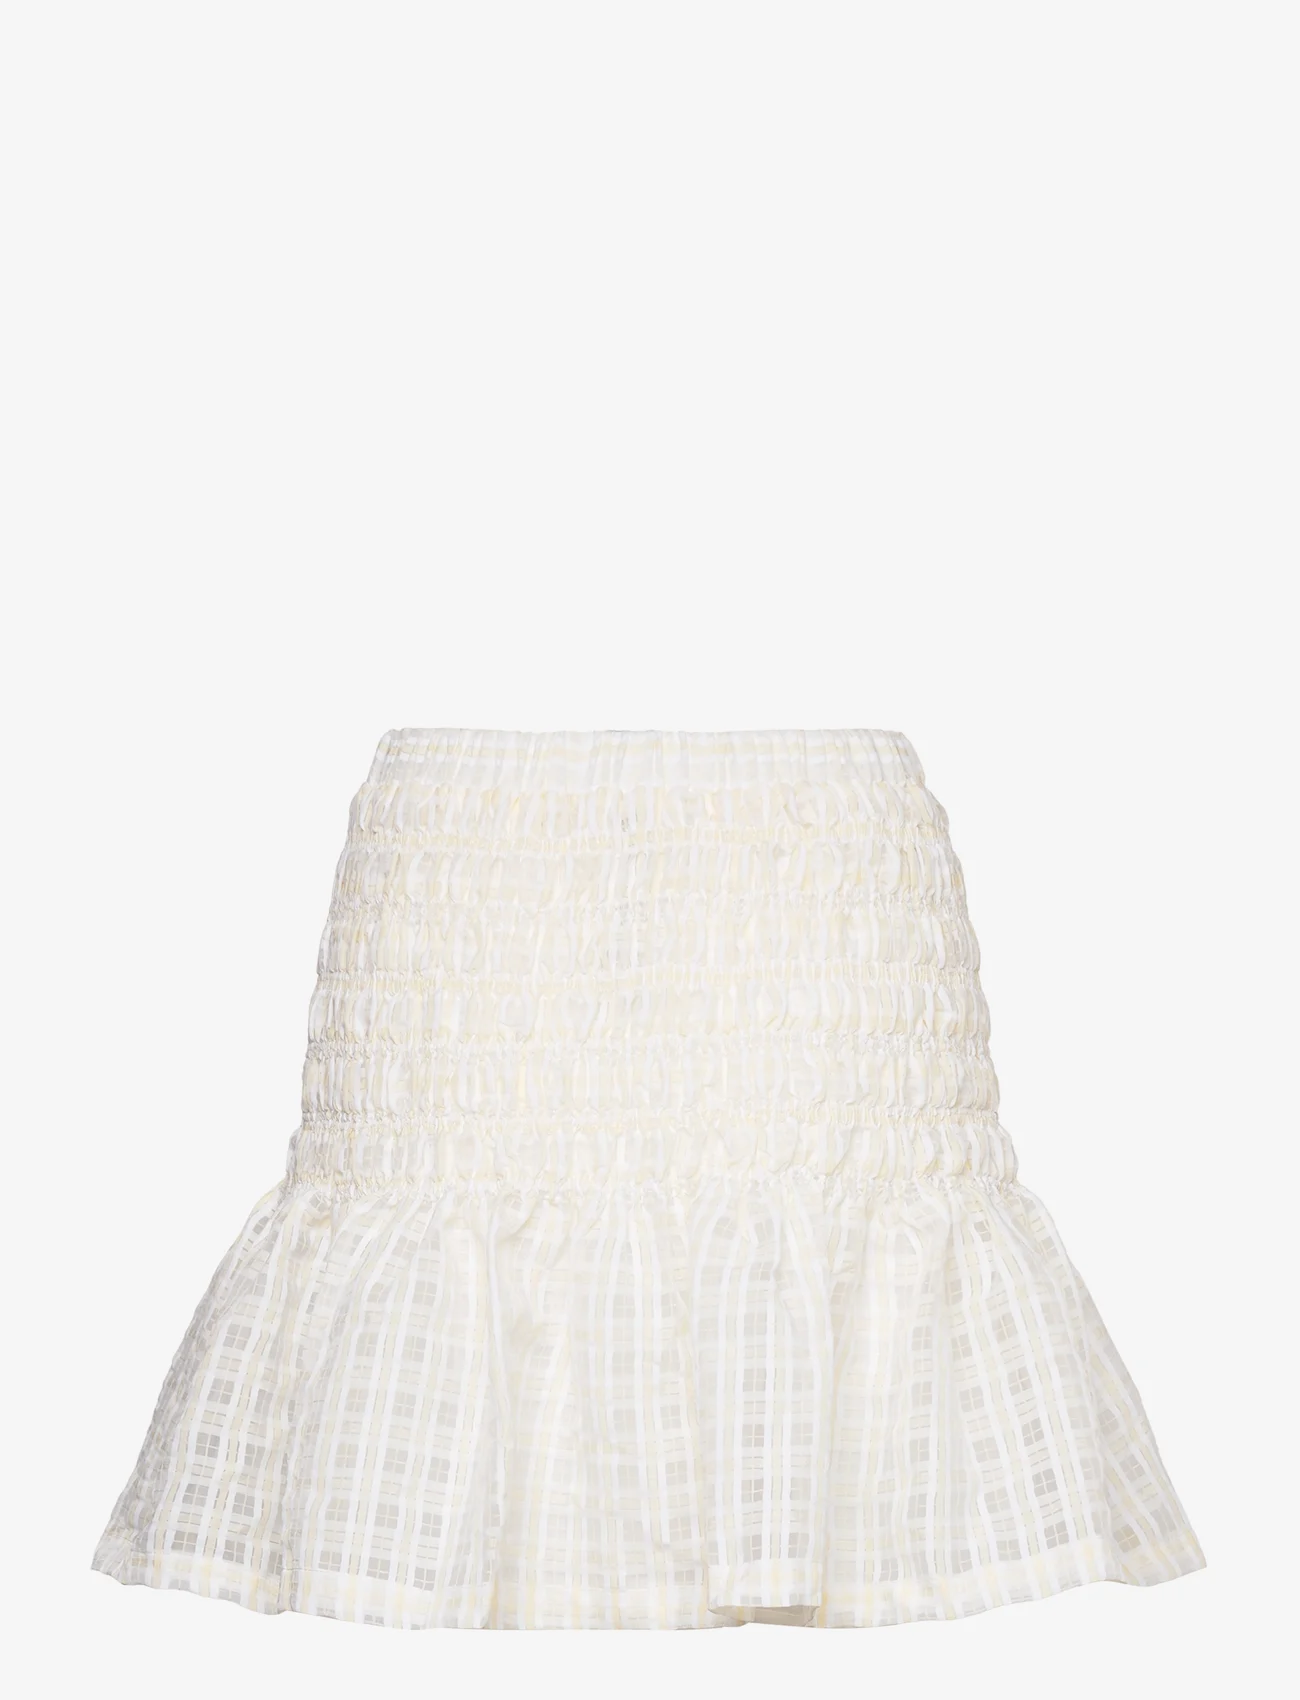 A-View - Crystal skirt - korte nederdele - pale yellow - 1